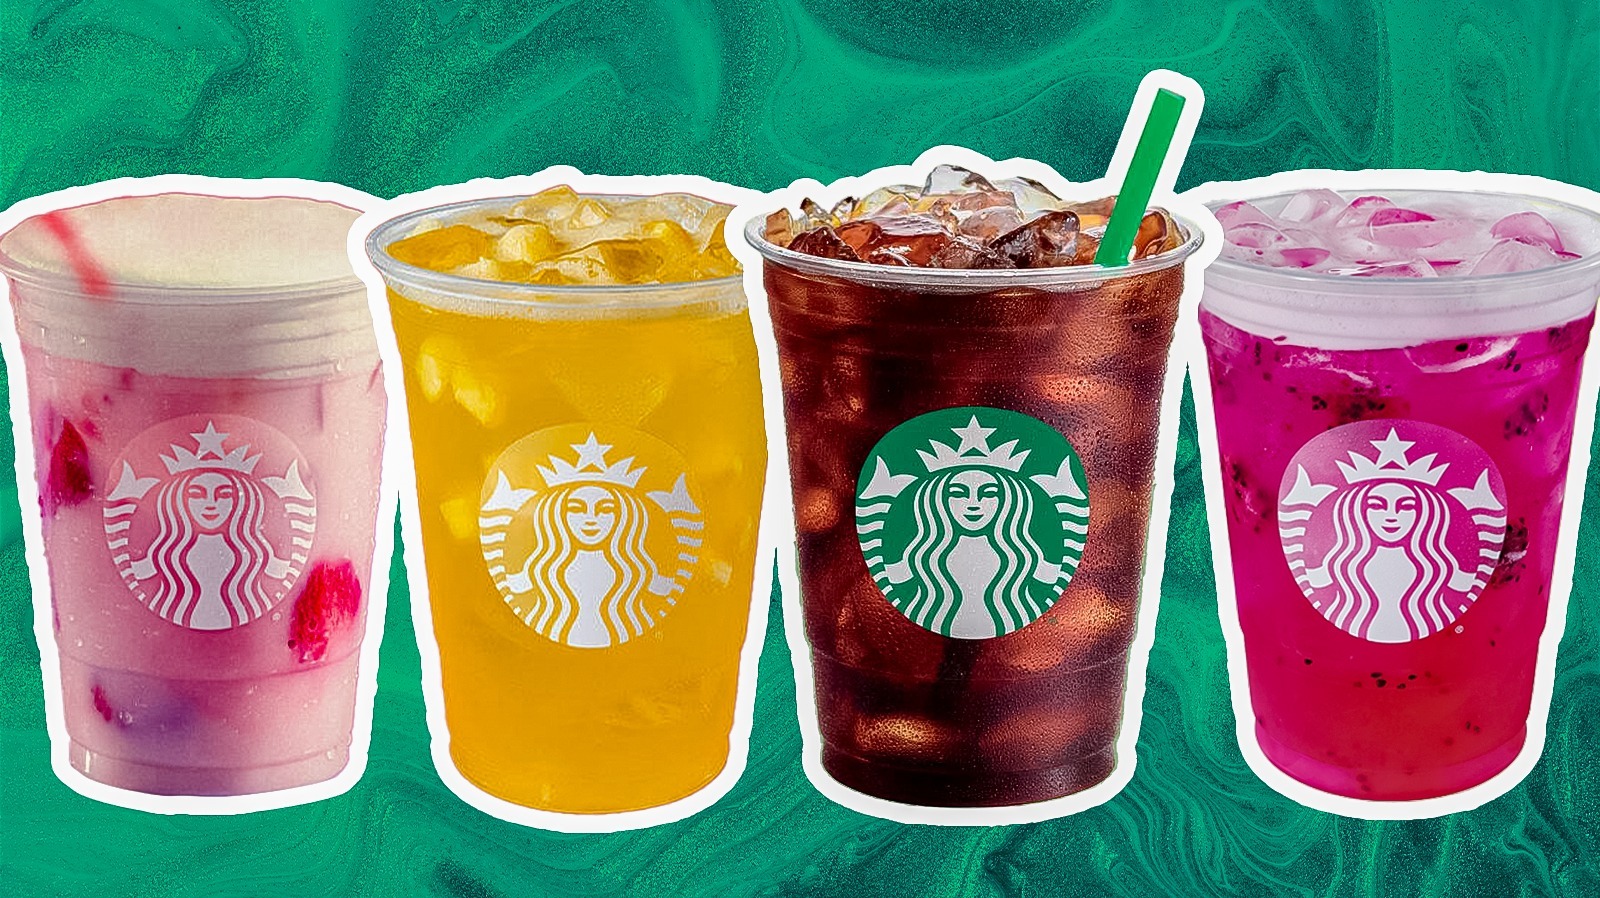 This Year, You Can Order 2 Vegan Holiday Drinks at Starbucks